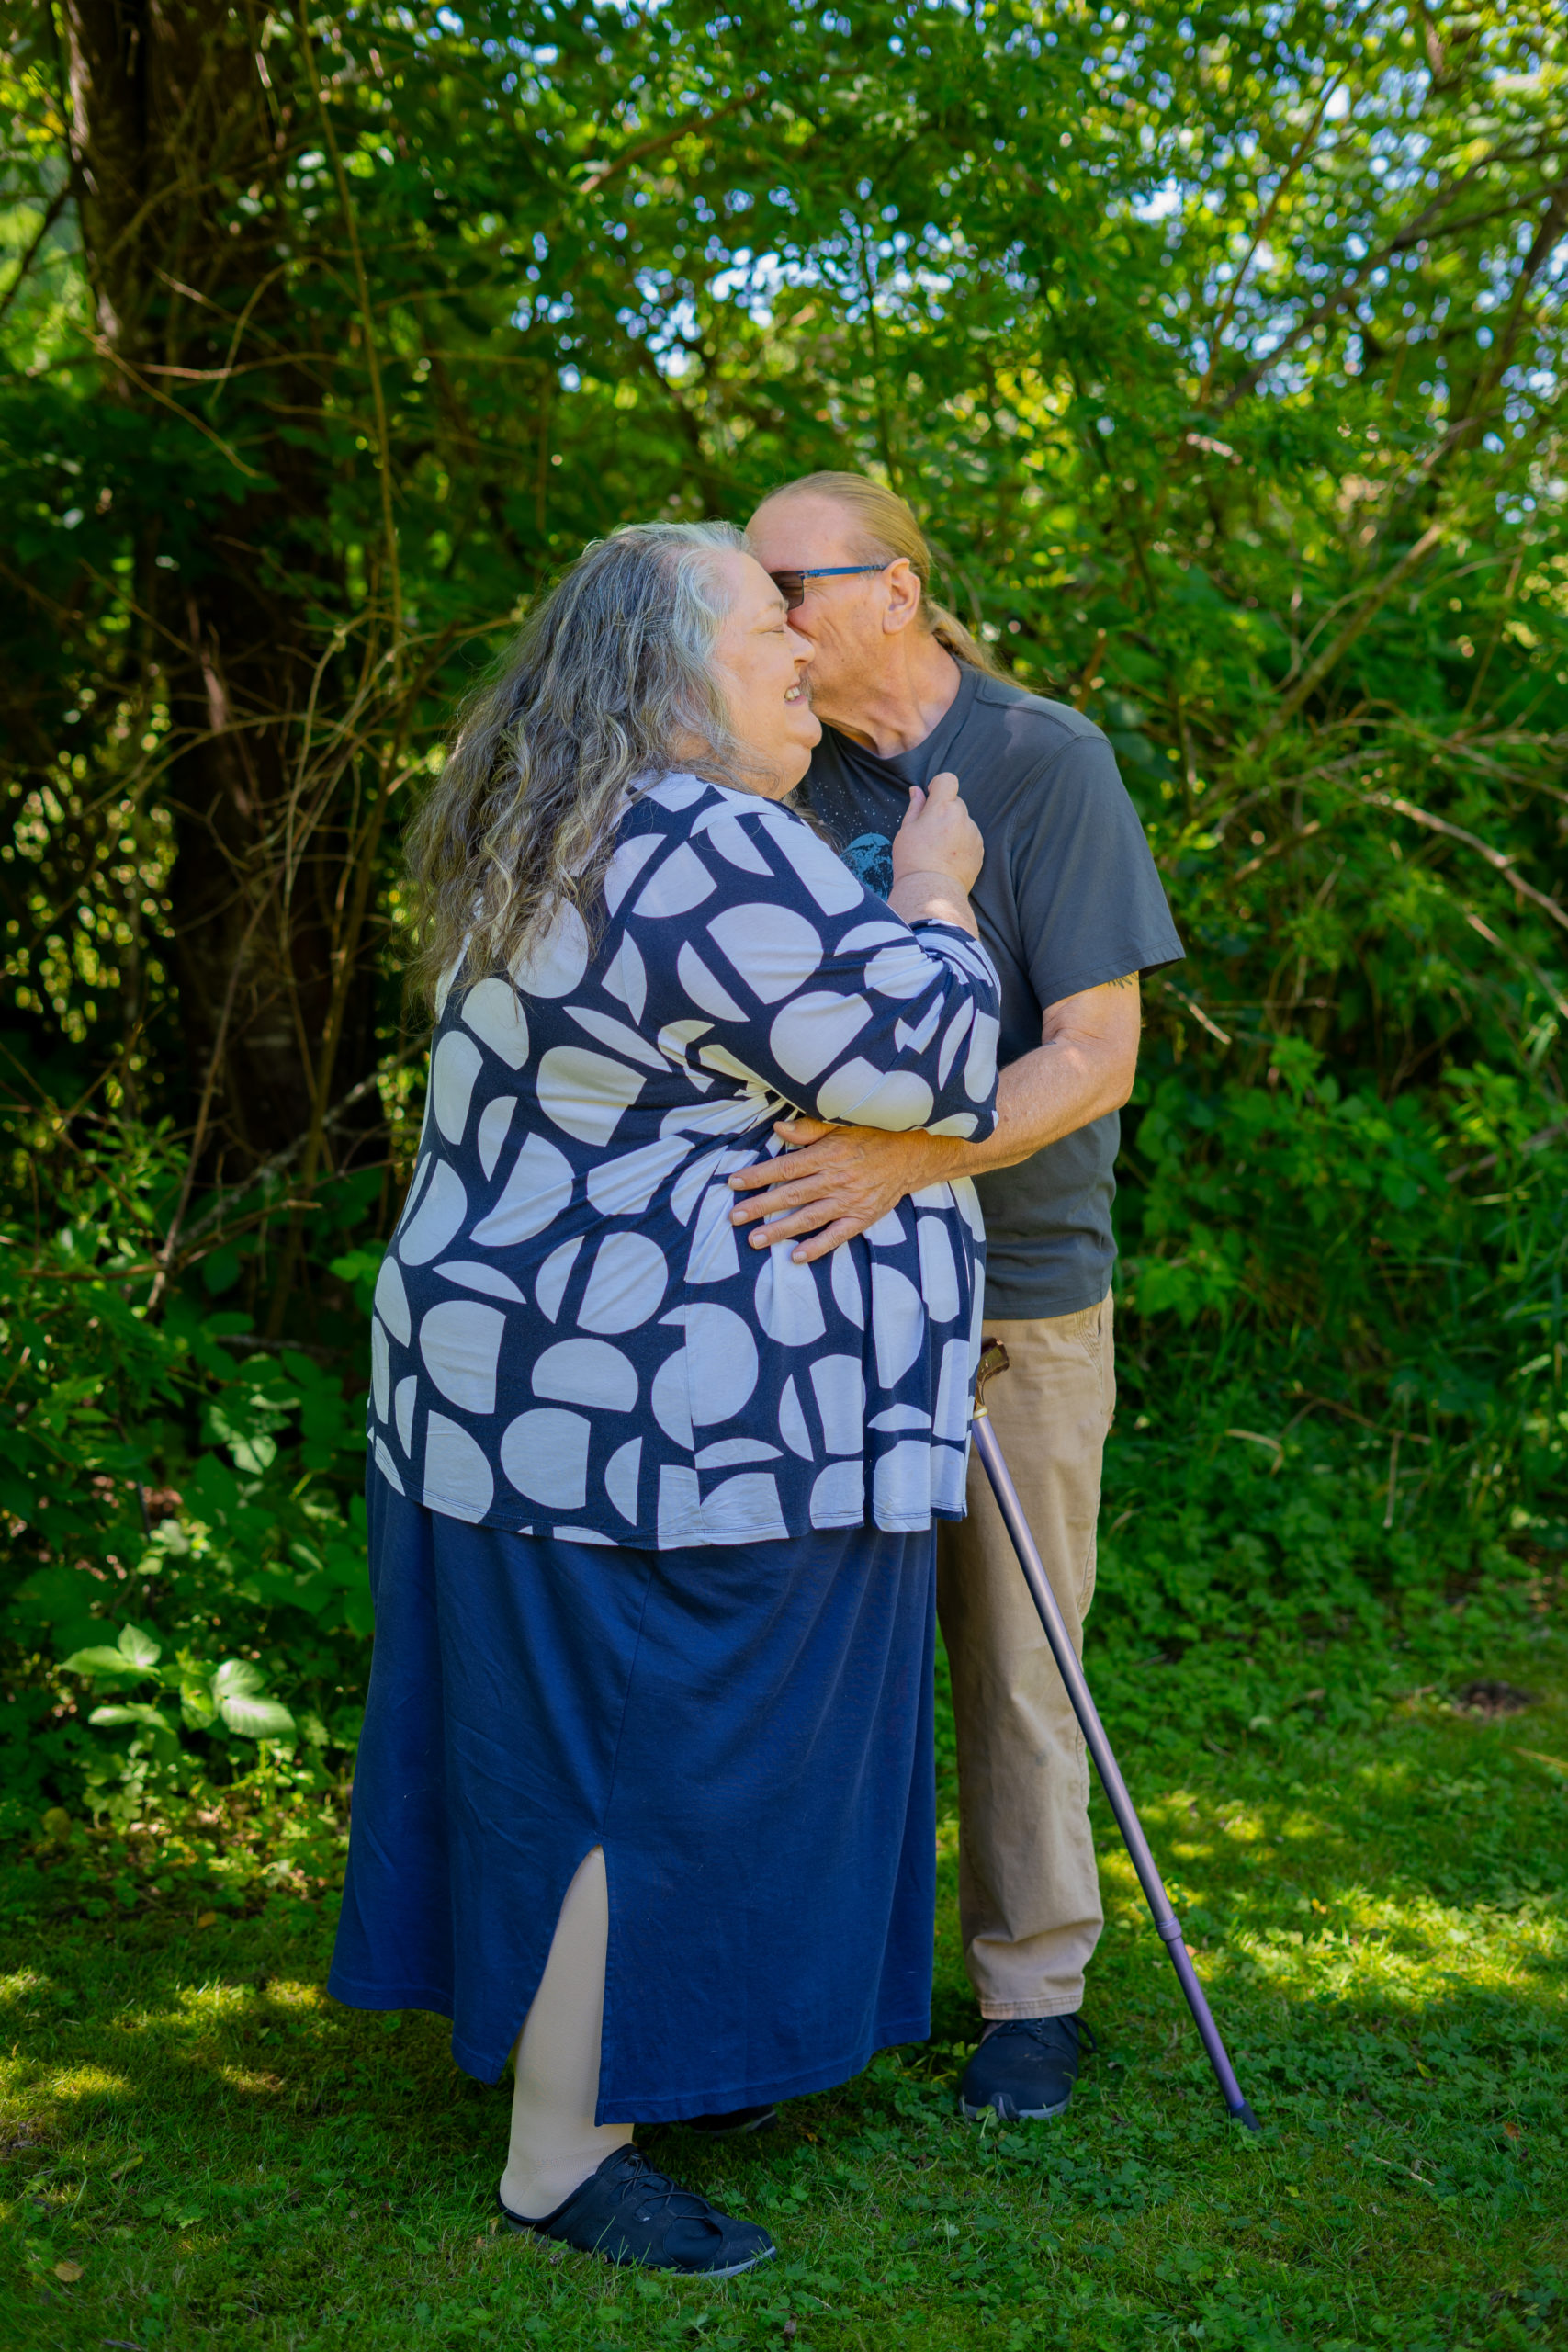 An older, mixed-size and disabled couple exchange a kiss during a body-positive stock photo shoot.